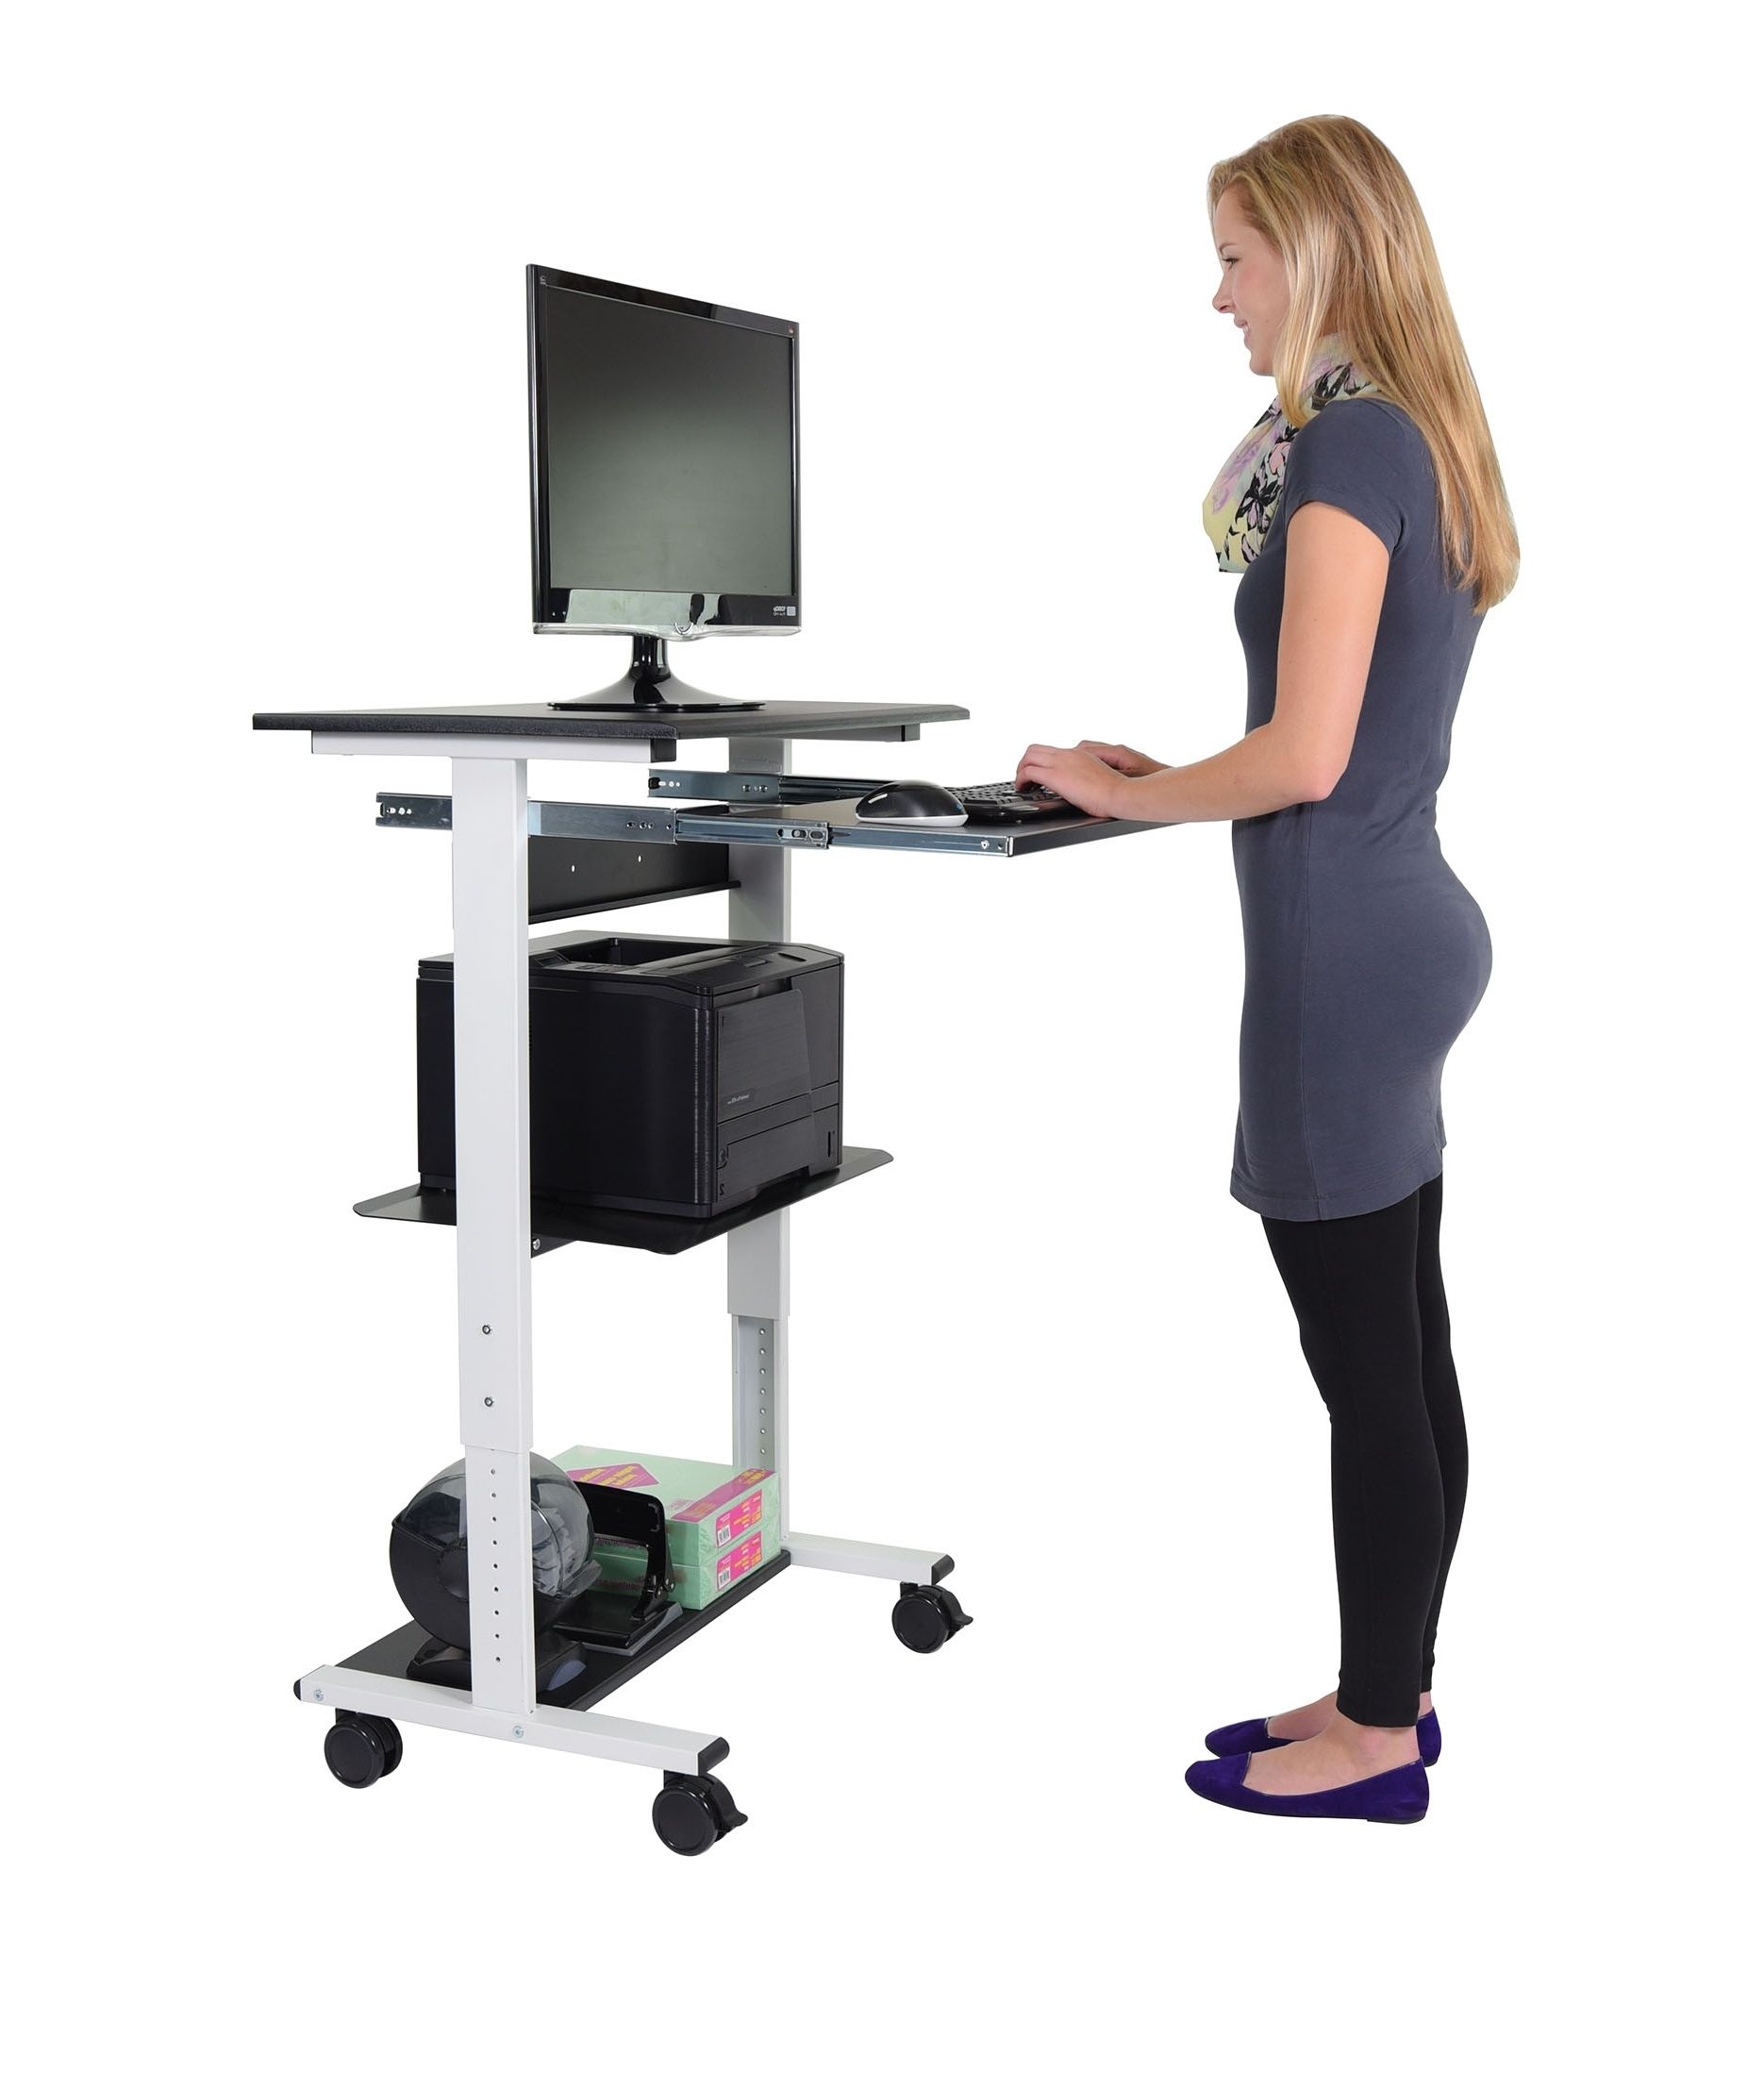 2018 Standing Computer Desks Inside Mobile Standing Computer Workstation With Tray (View 4 of 20)